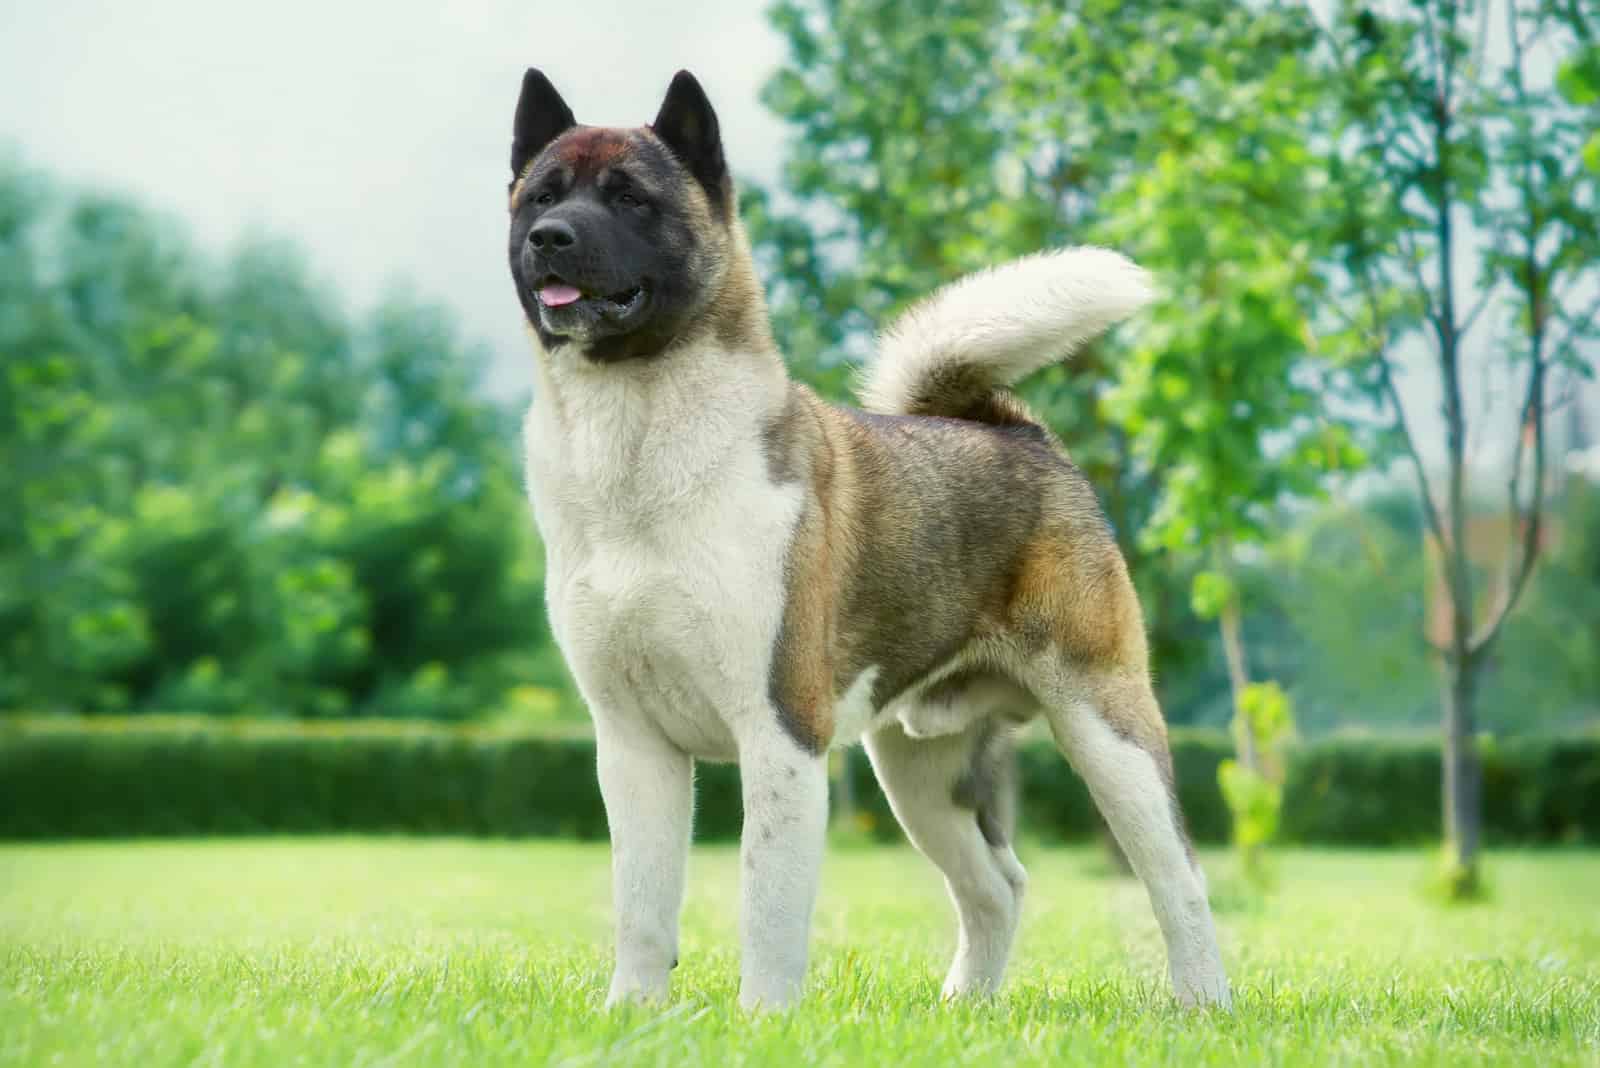 Akita in the garden on the green lawn